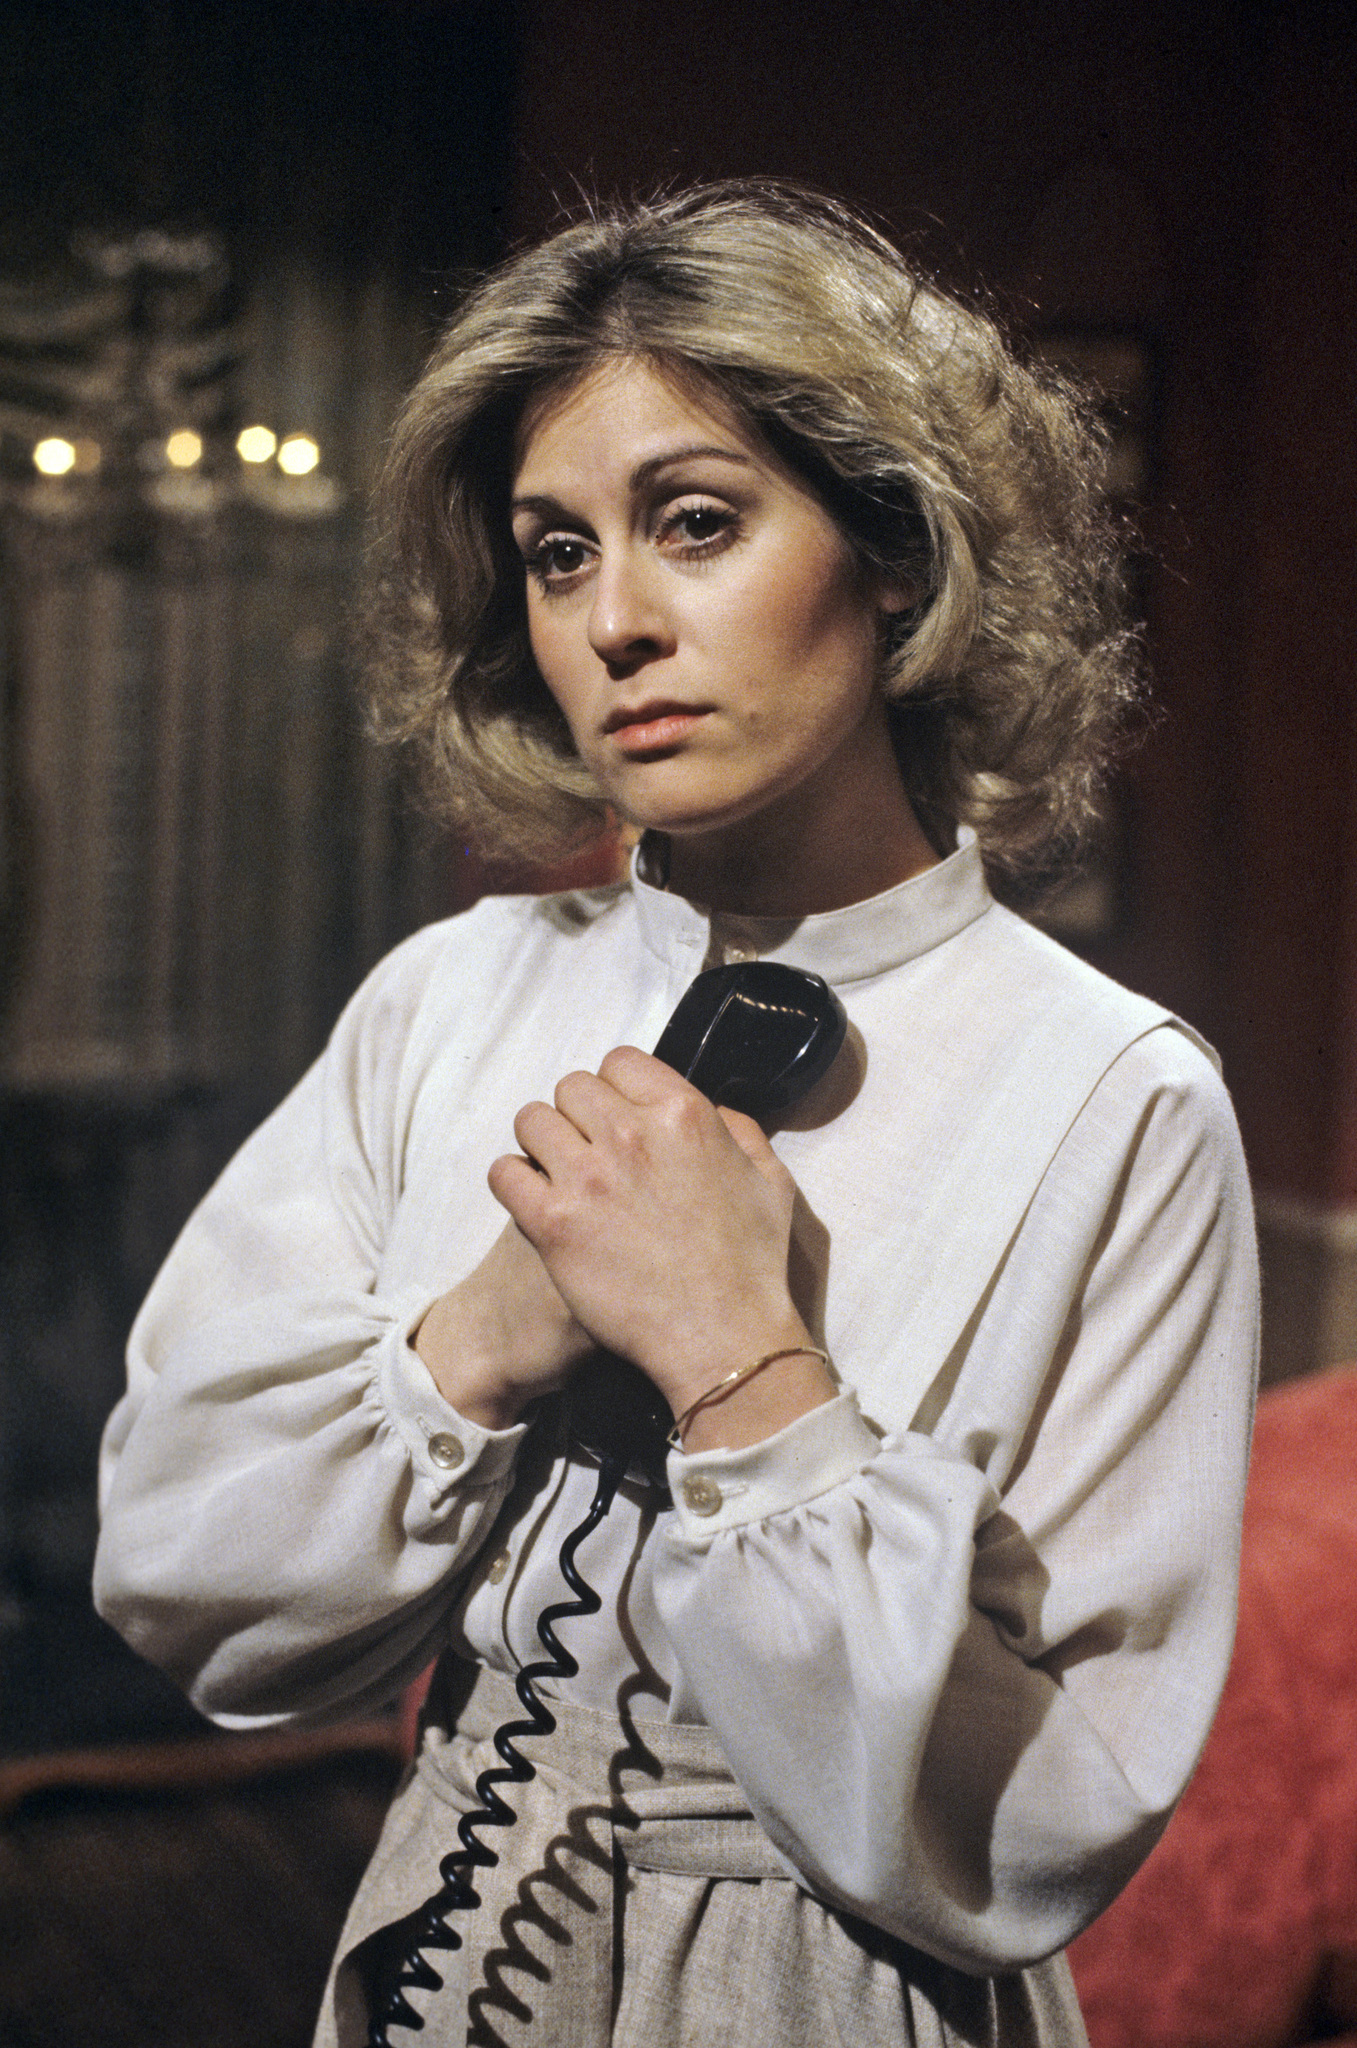 ONE LIFE TO LIVE - Judith Light - 4/16/79